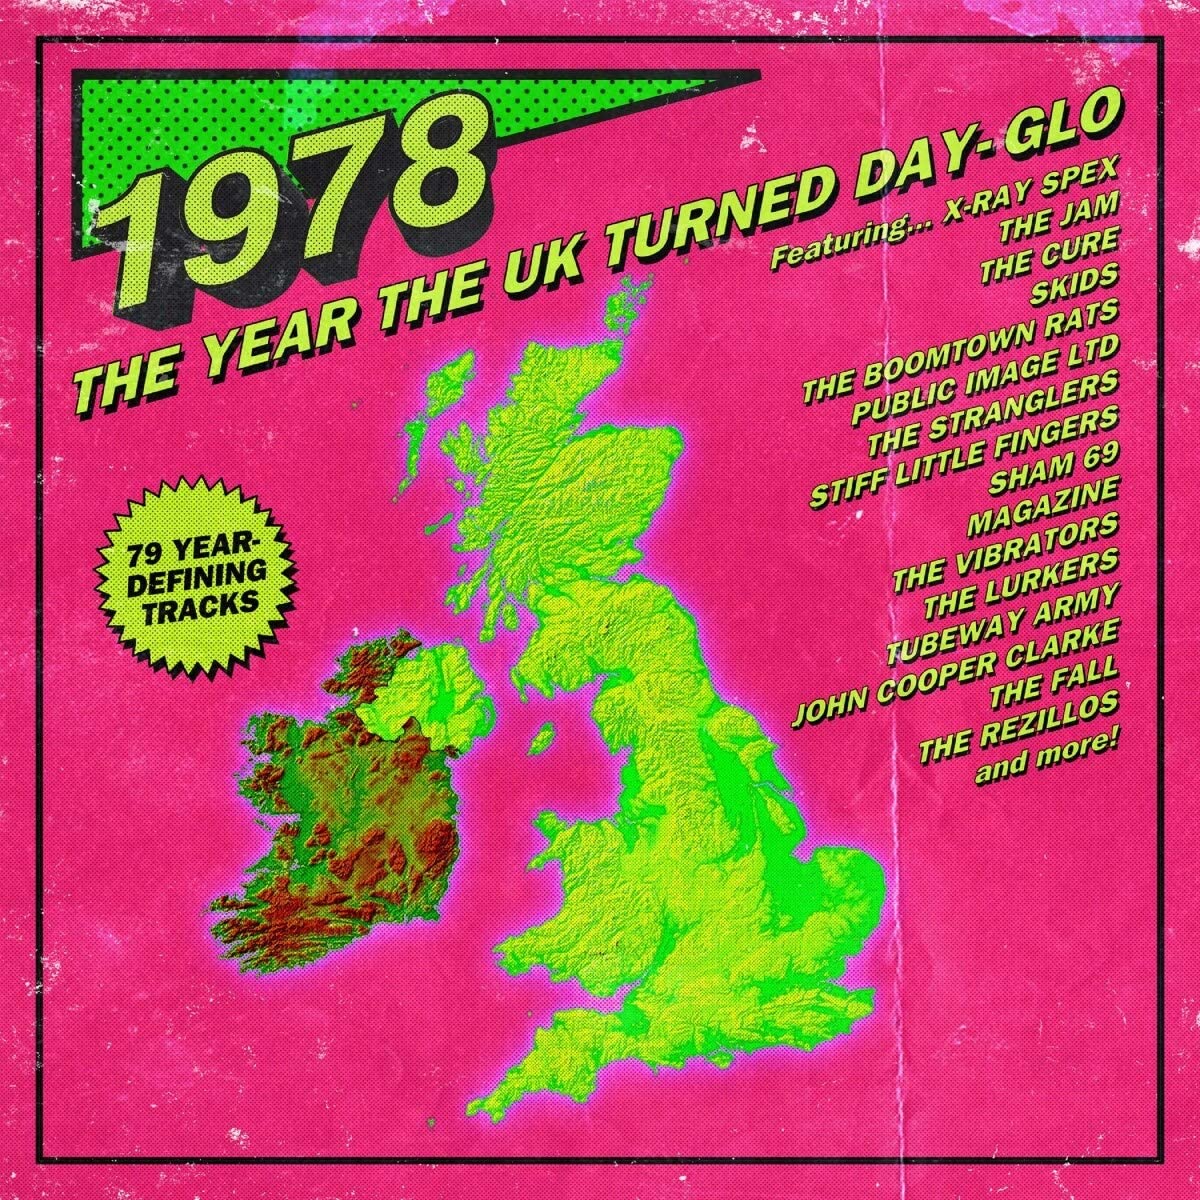 1978: The Year The Uk Turned Day-Glo - 3CD